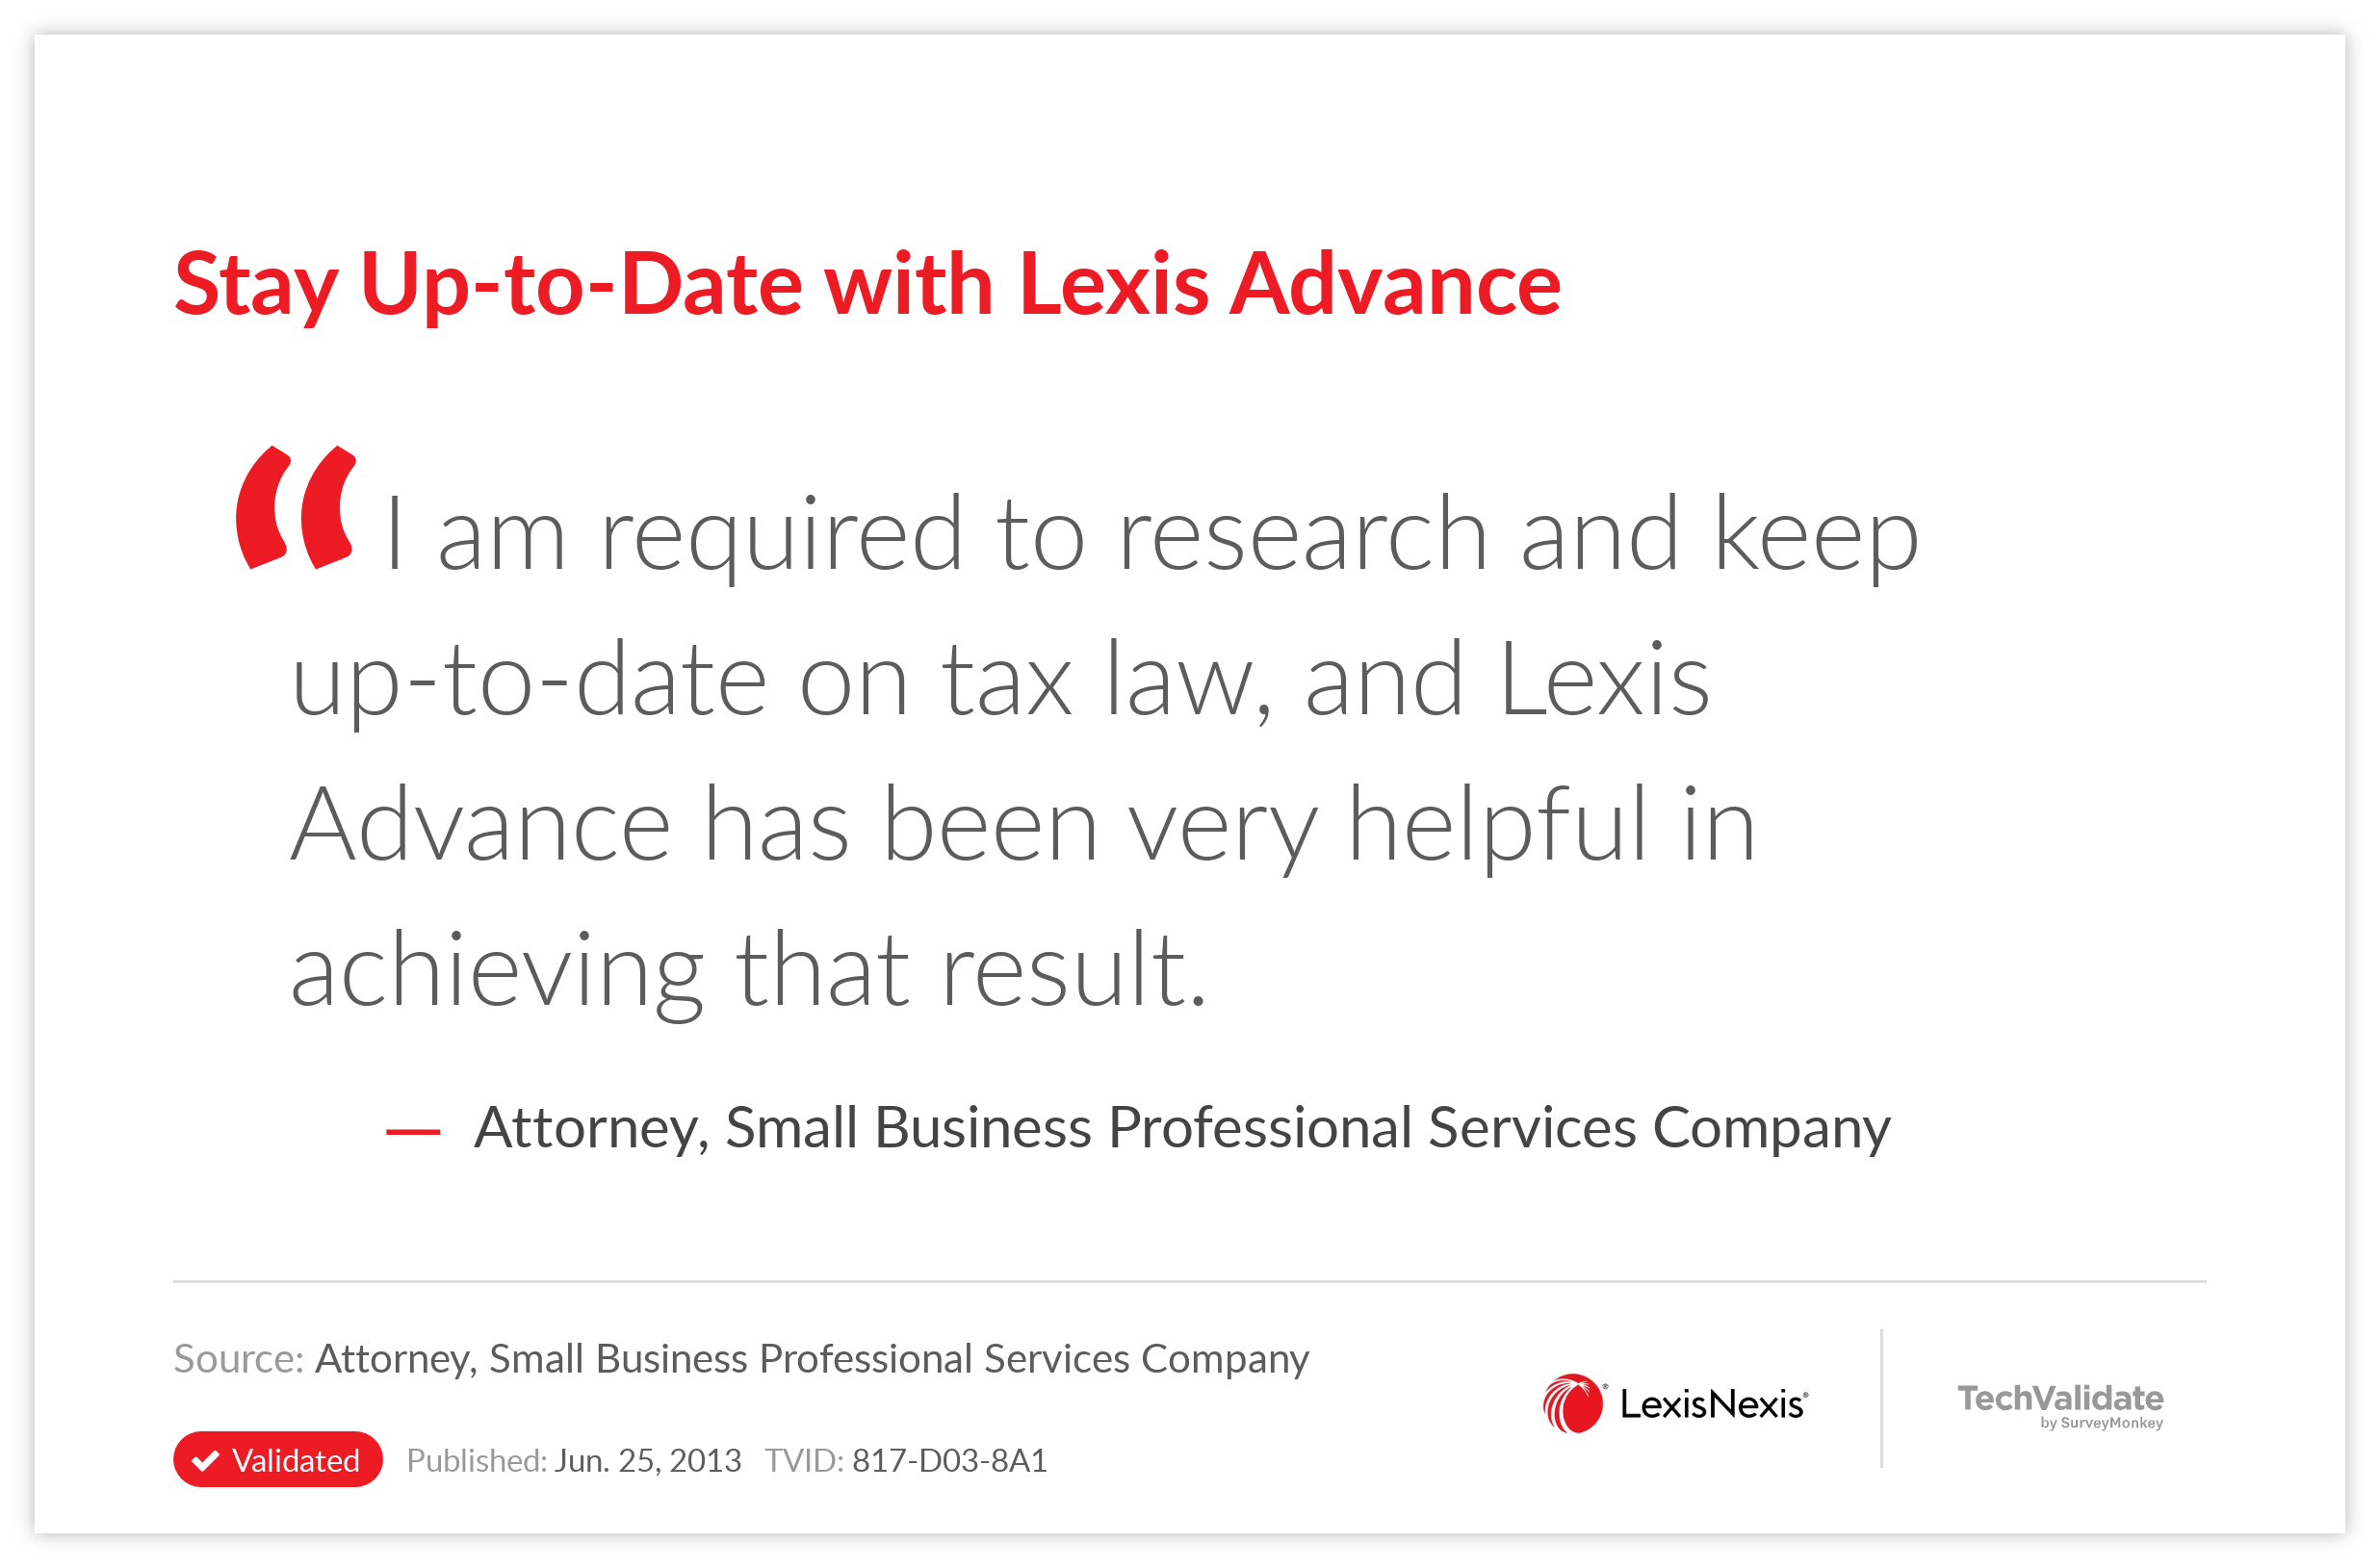 Stay Up-to-Date with Lexis Advance